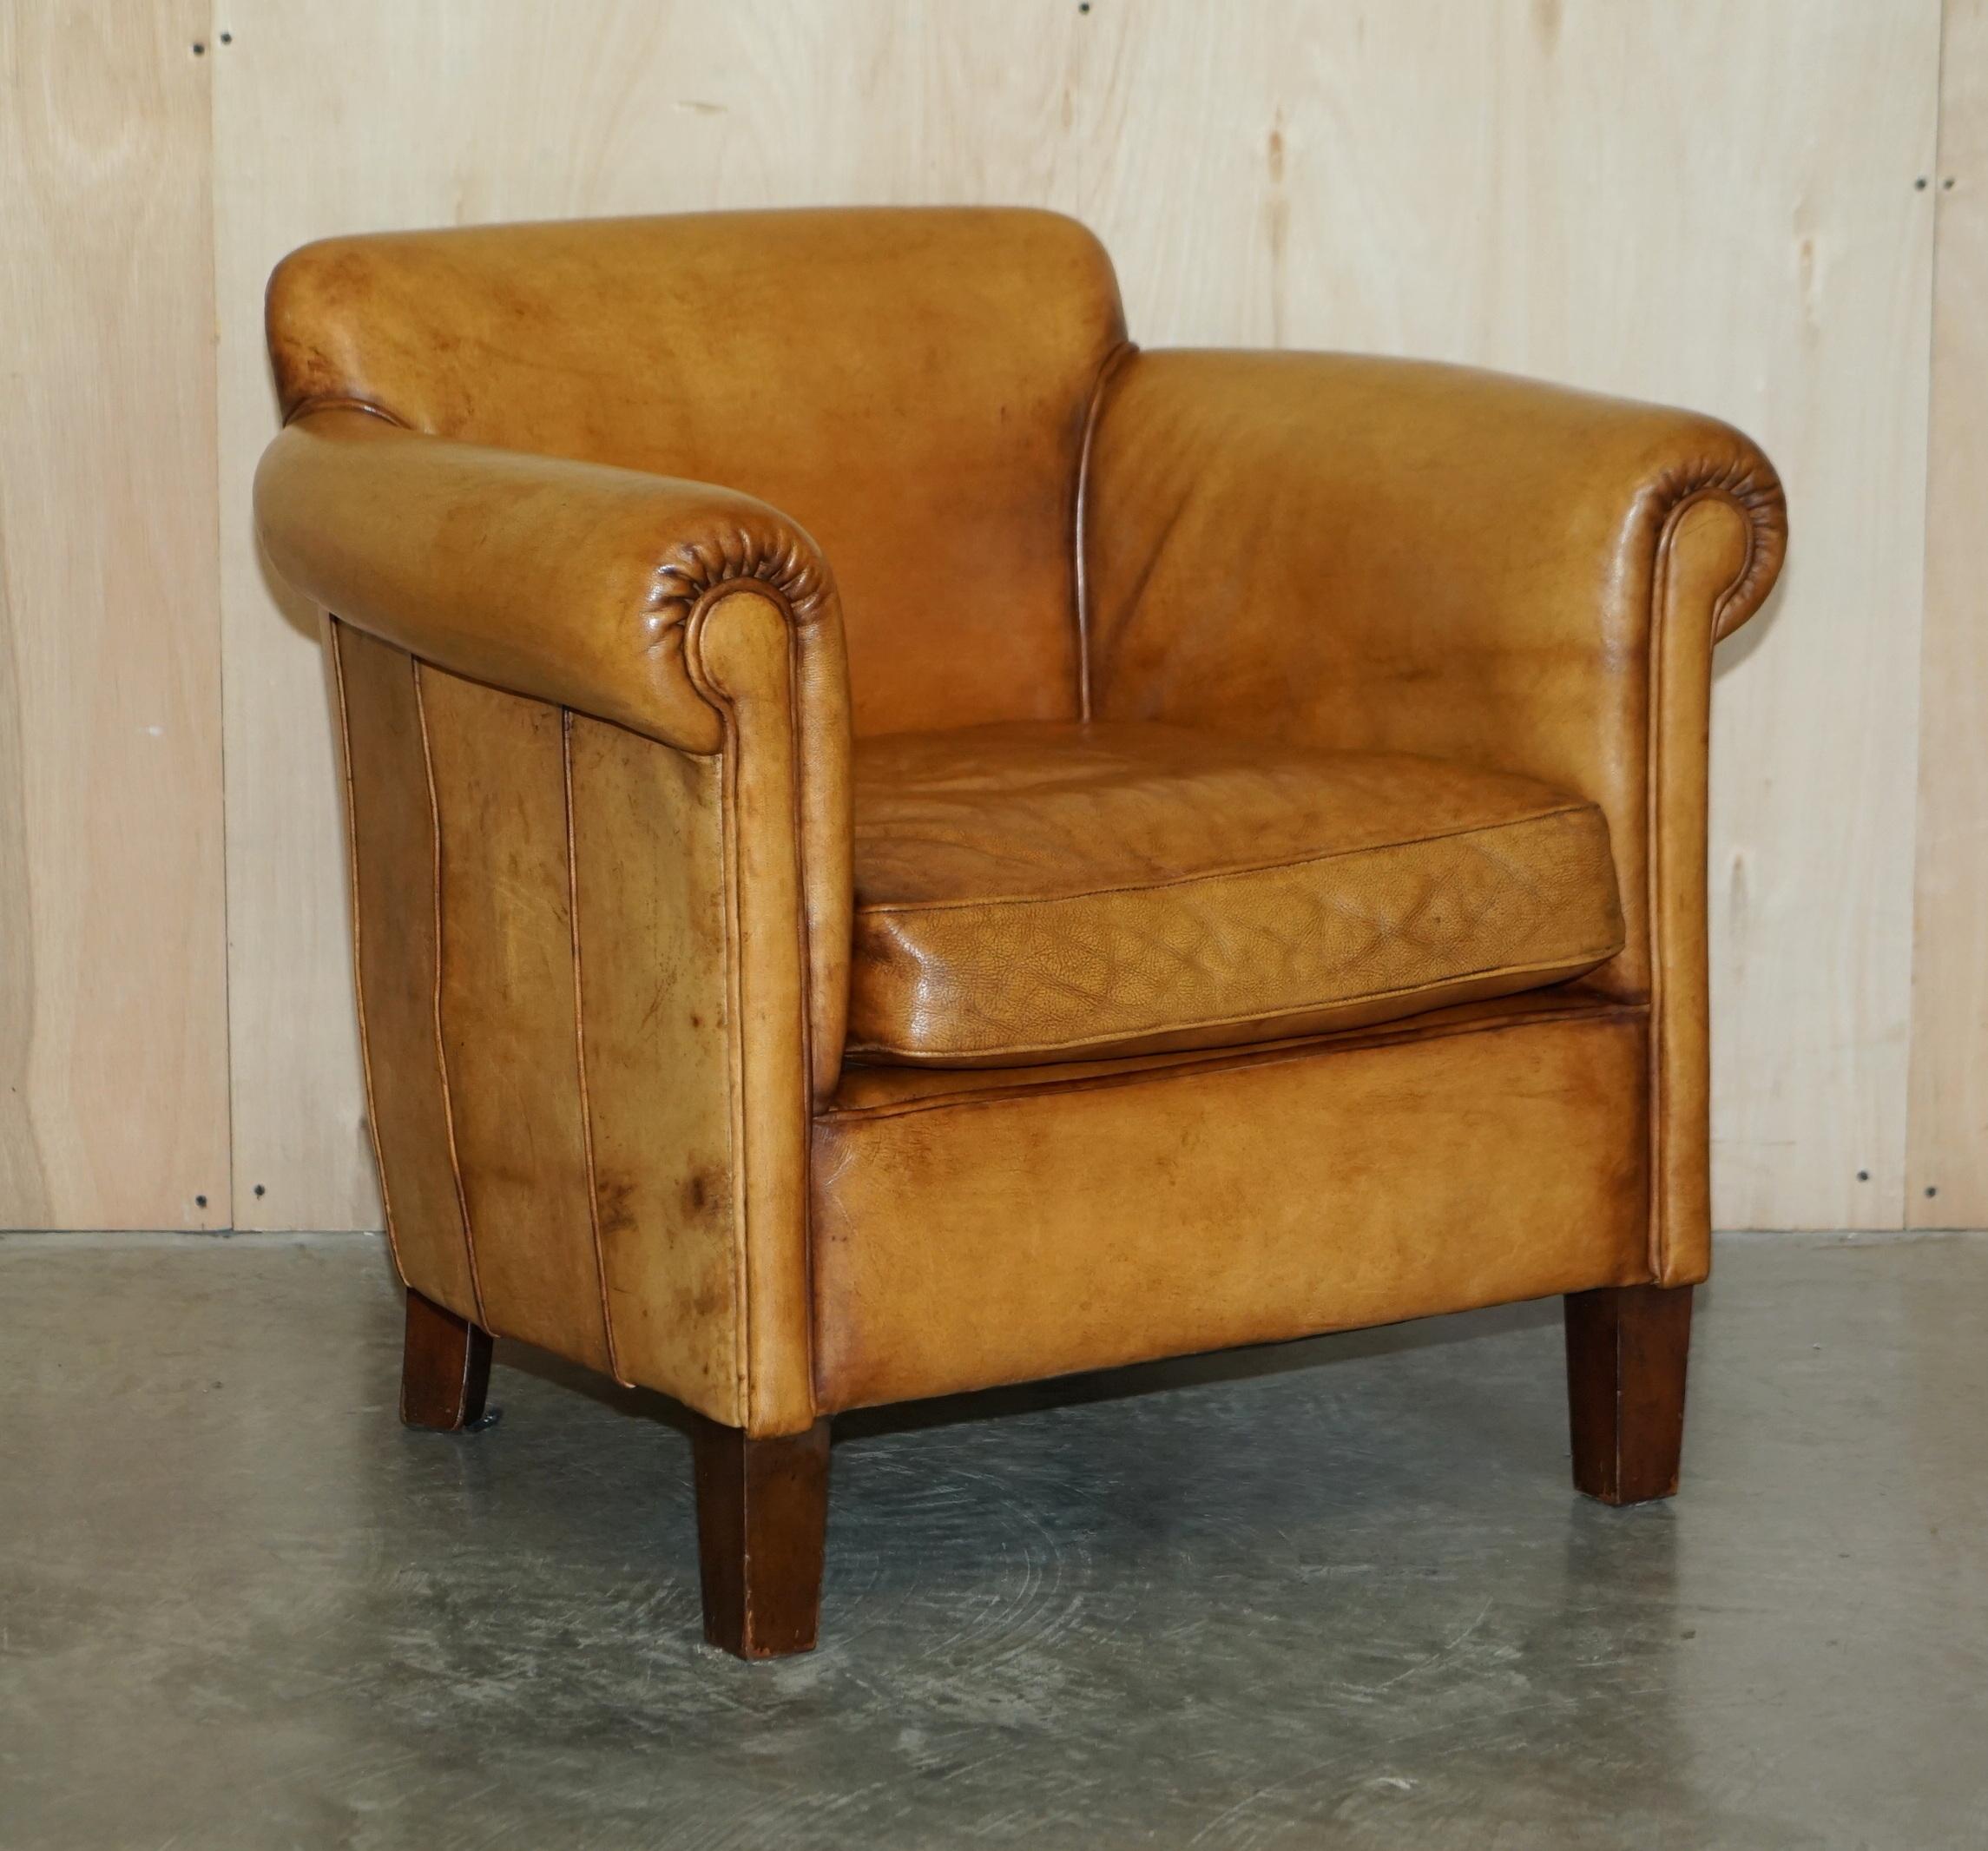 We are delighted to offer for sale this stunning John Lewis, Camford suite in heritage tan brown leather.

These are a lovely suite, super comfortable, the leather has nicely age, its heritage hide so it shows the natural patina of the leather